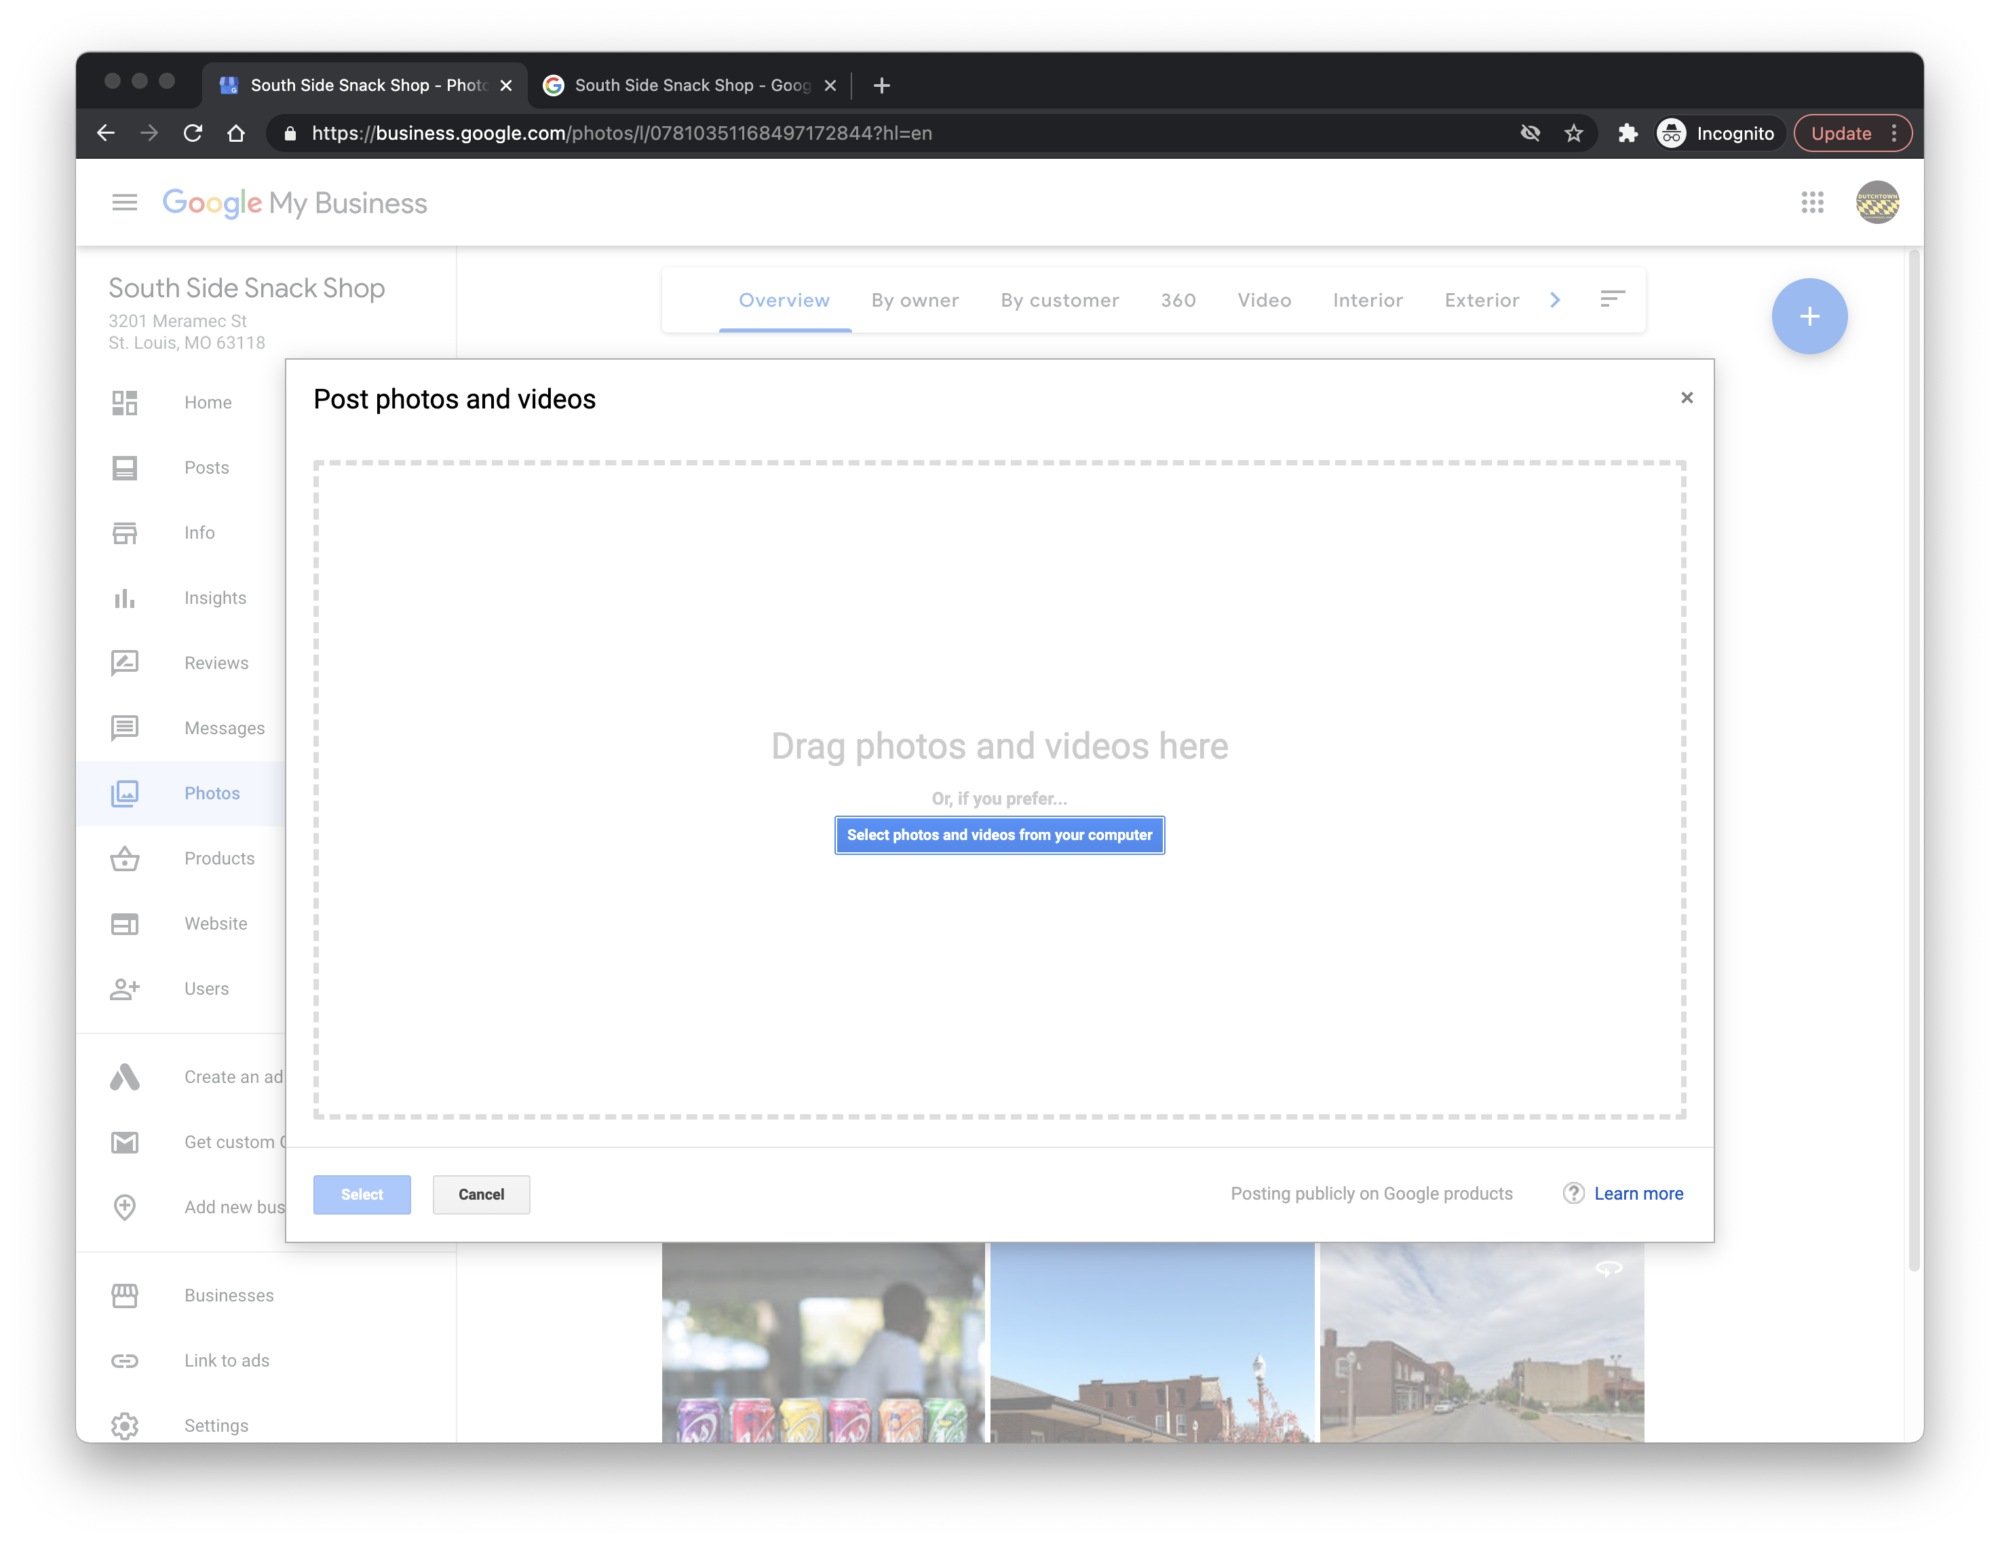 Adding photos to your Google My Business profile.